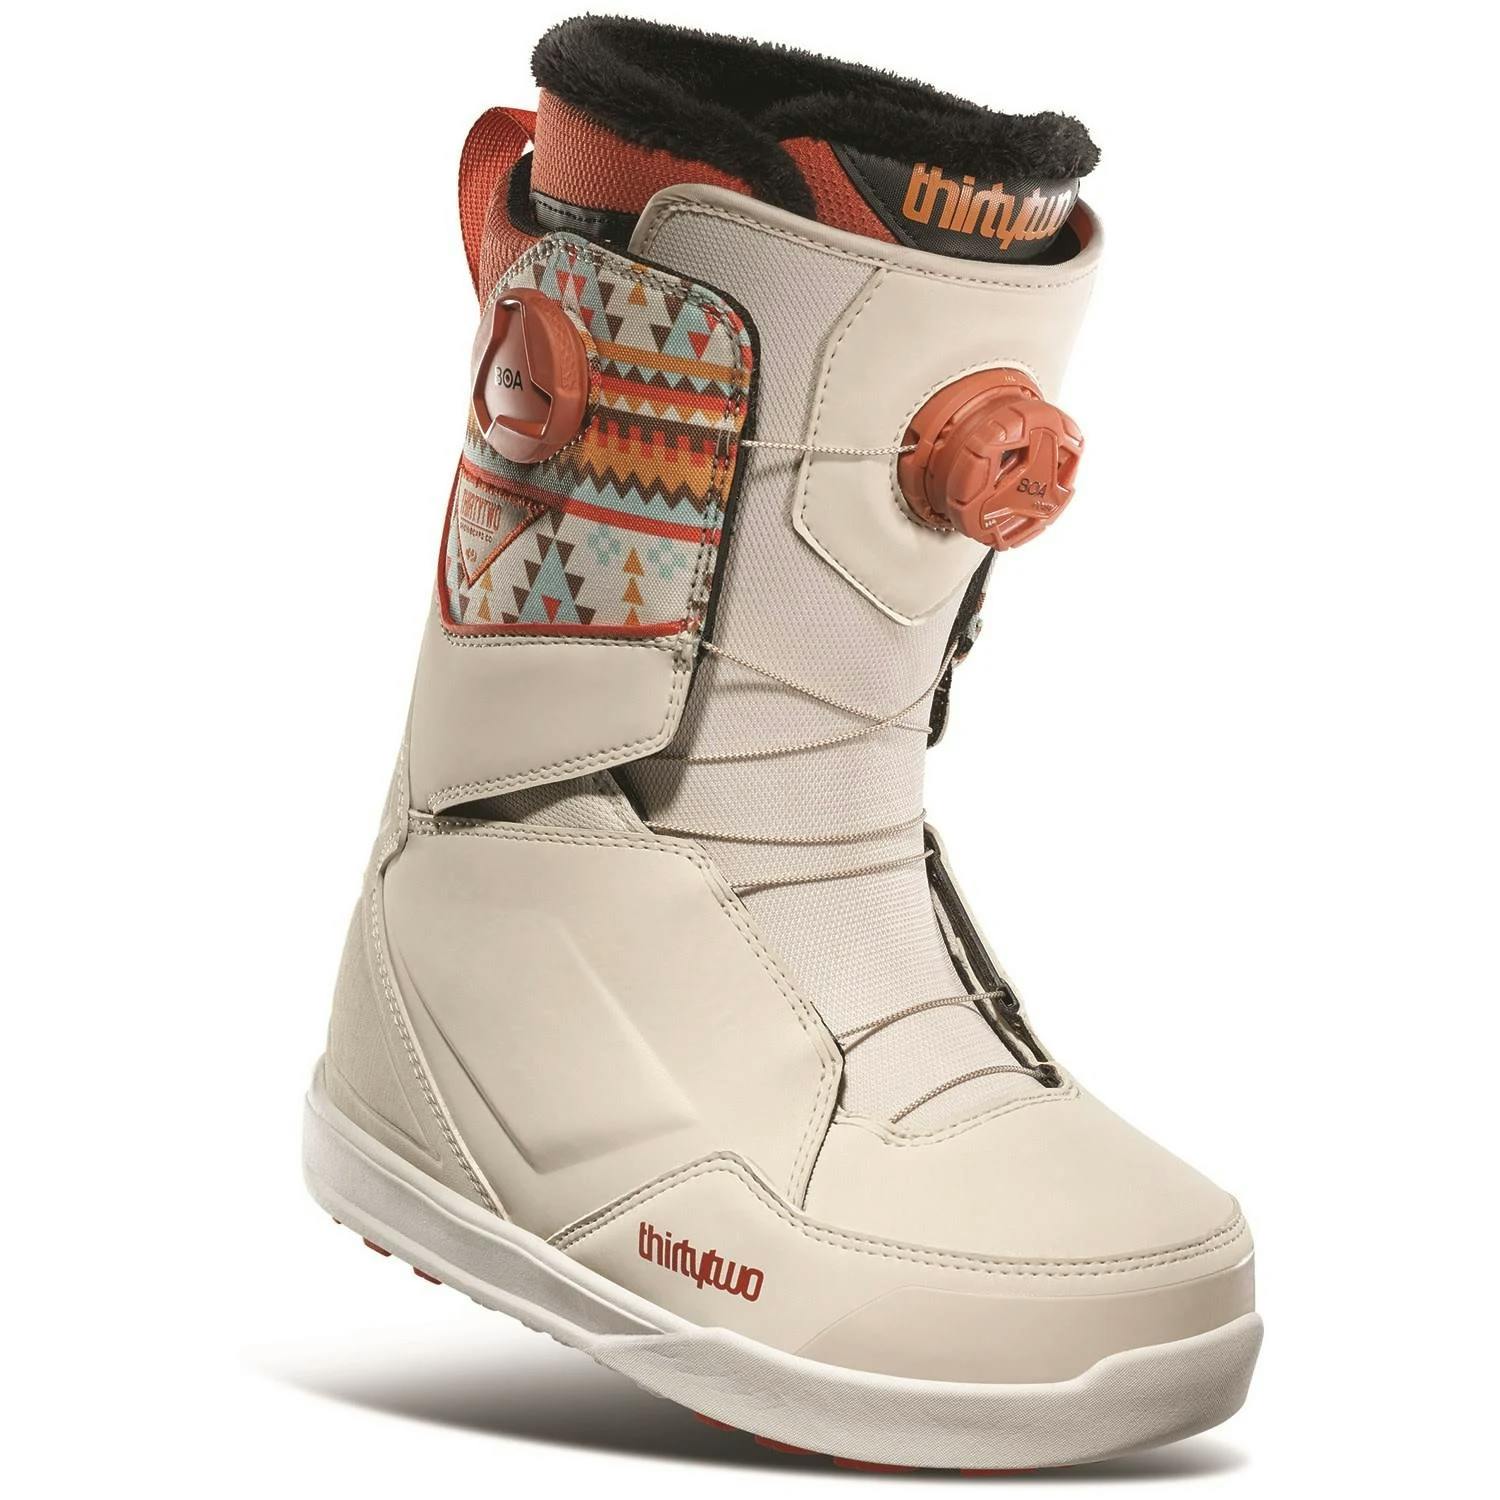 thirtytwo Women's Lashed Double BOA Snowboard Boots · 2021